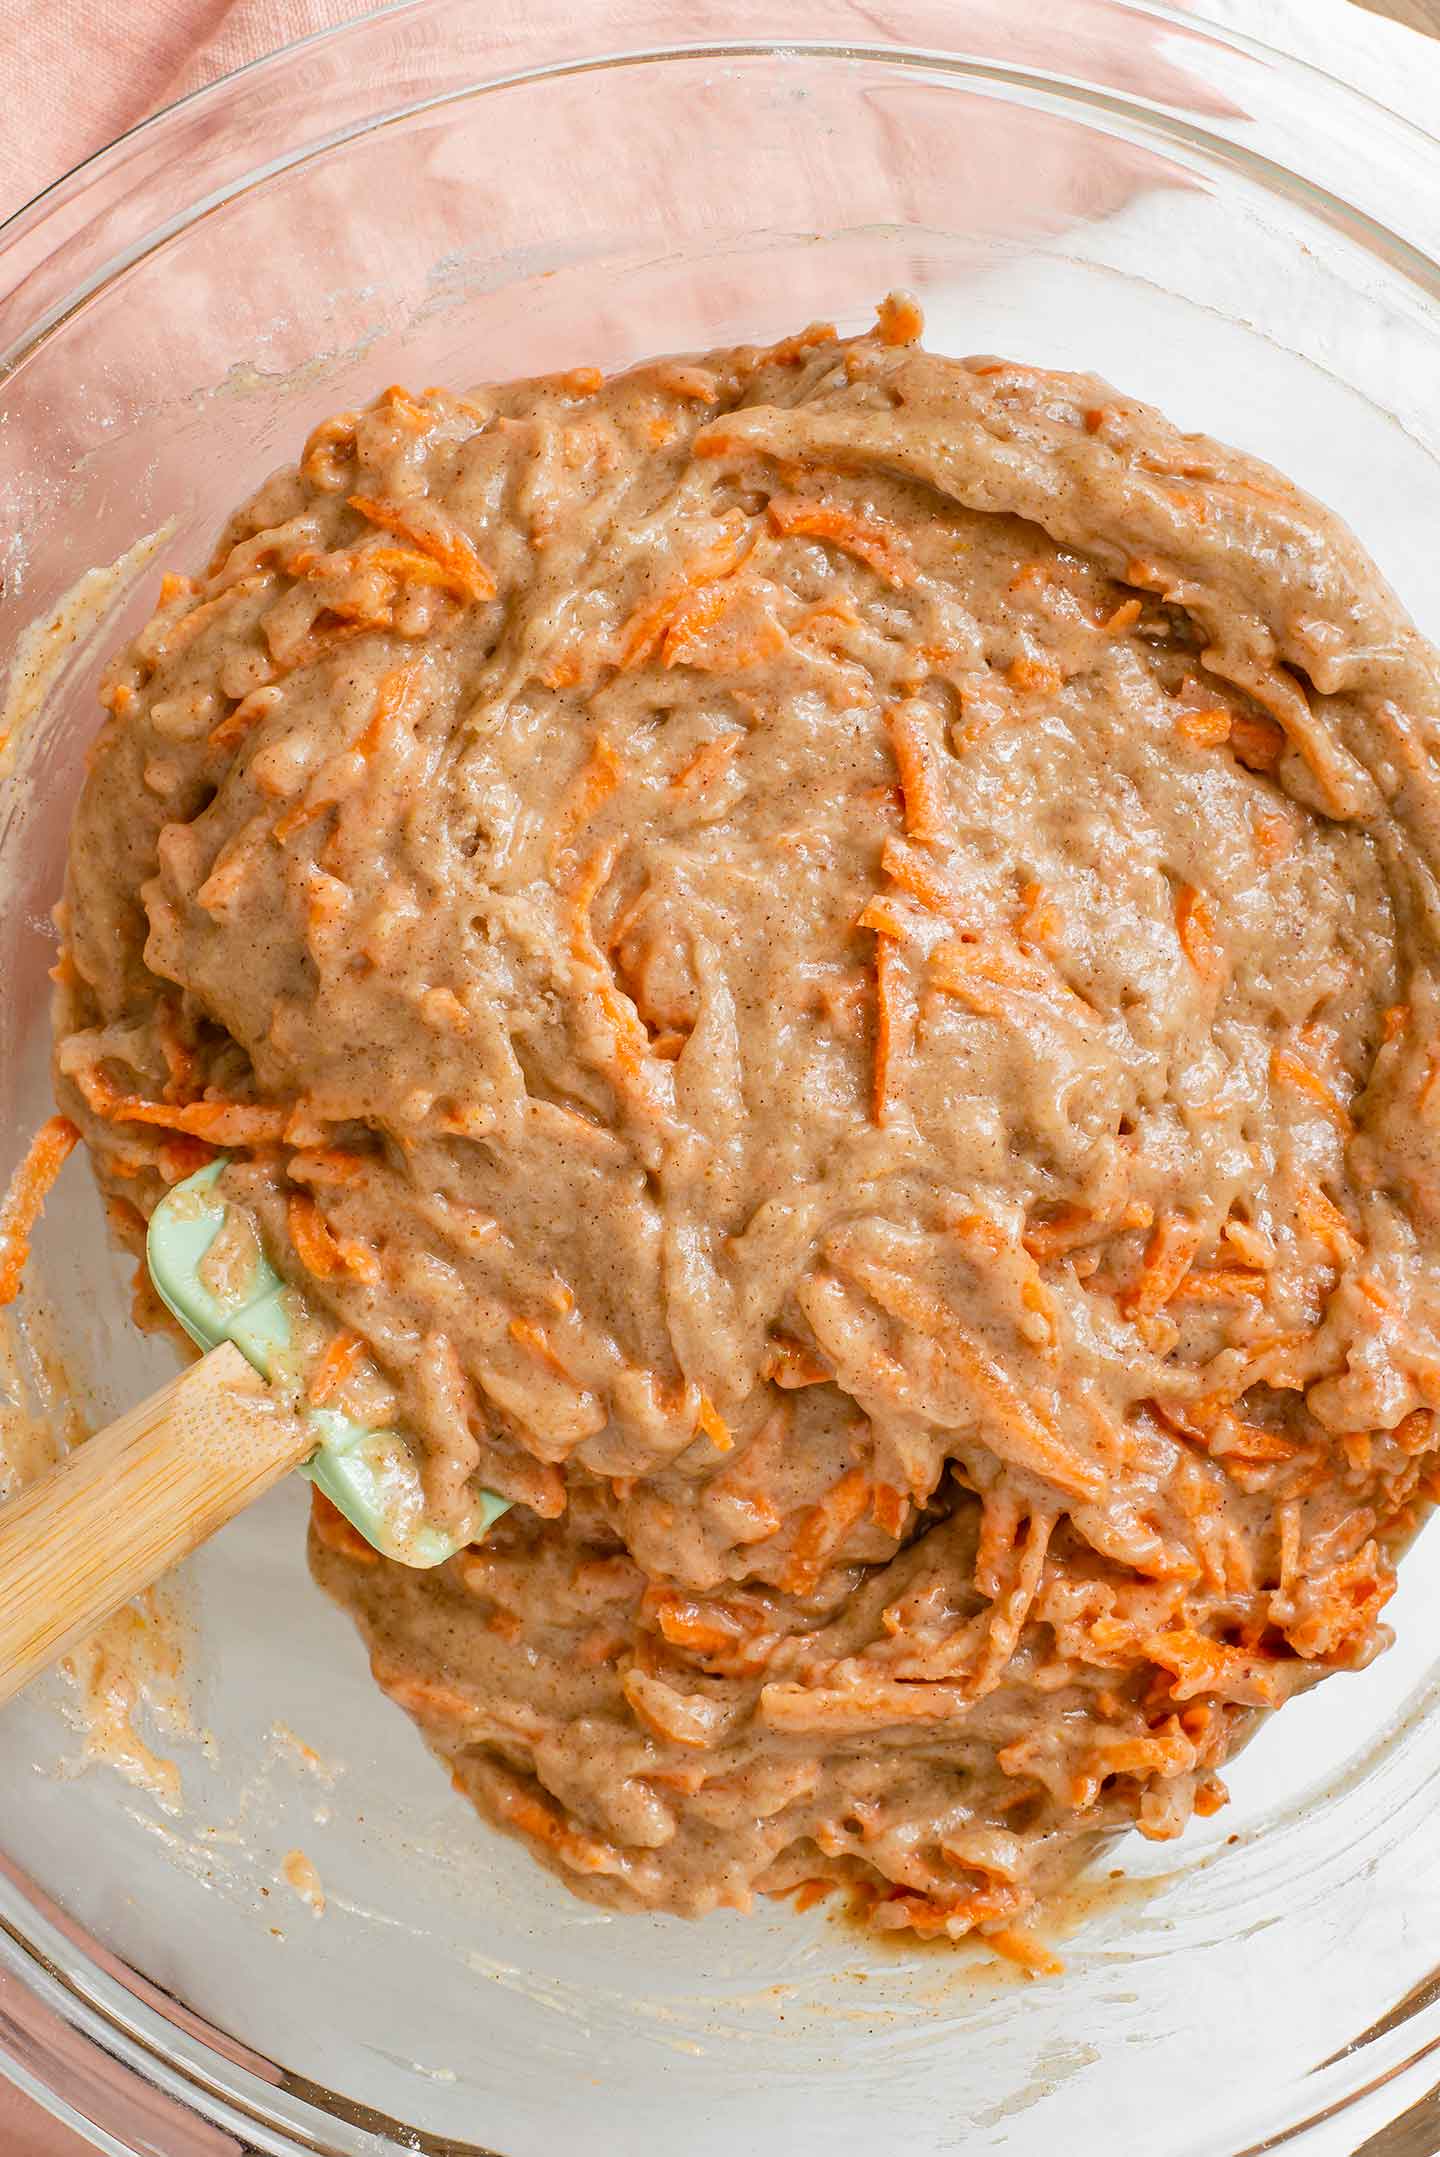 Top down view of a spatula mixing carrots into the cake batter. The batter is thick but moist.